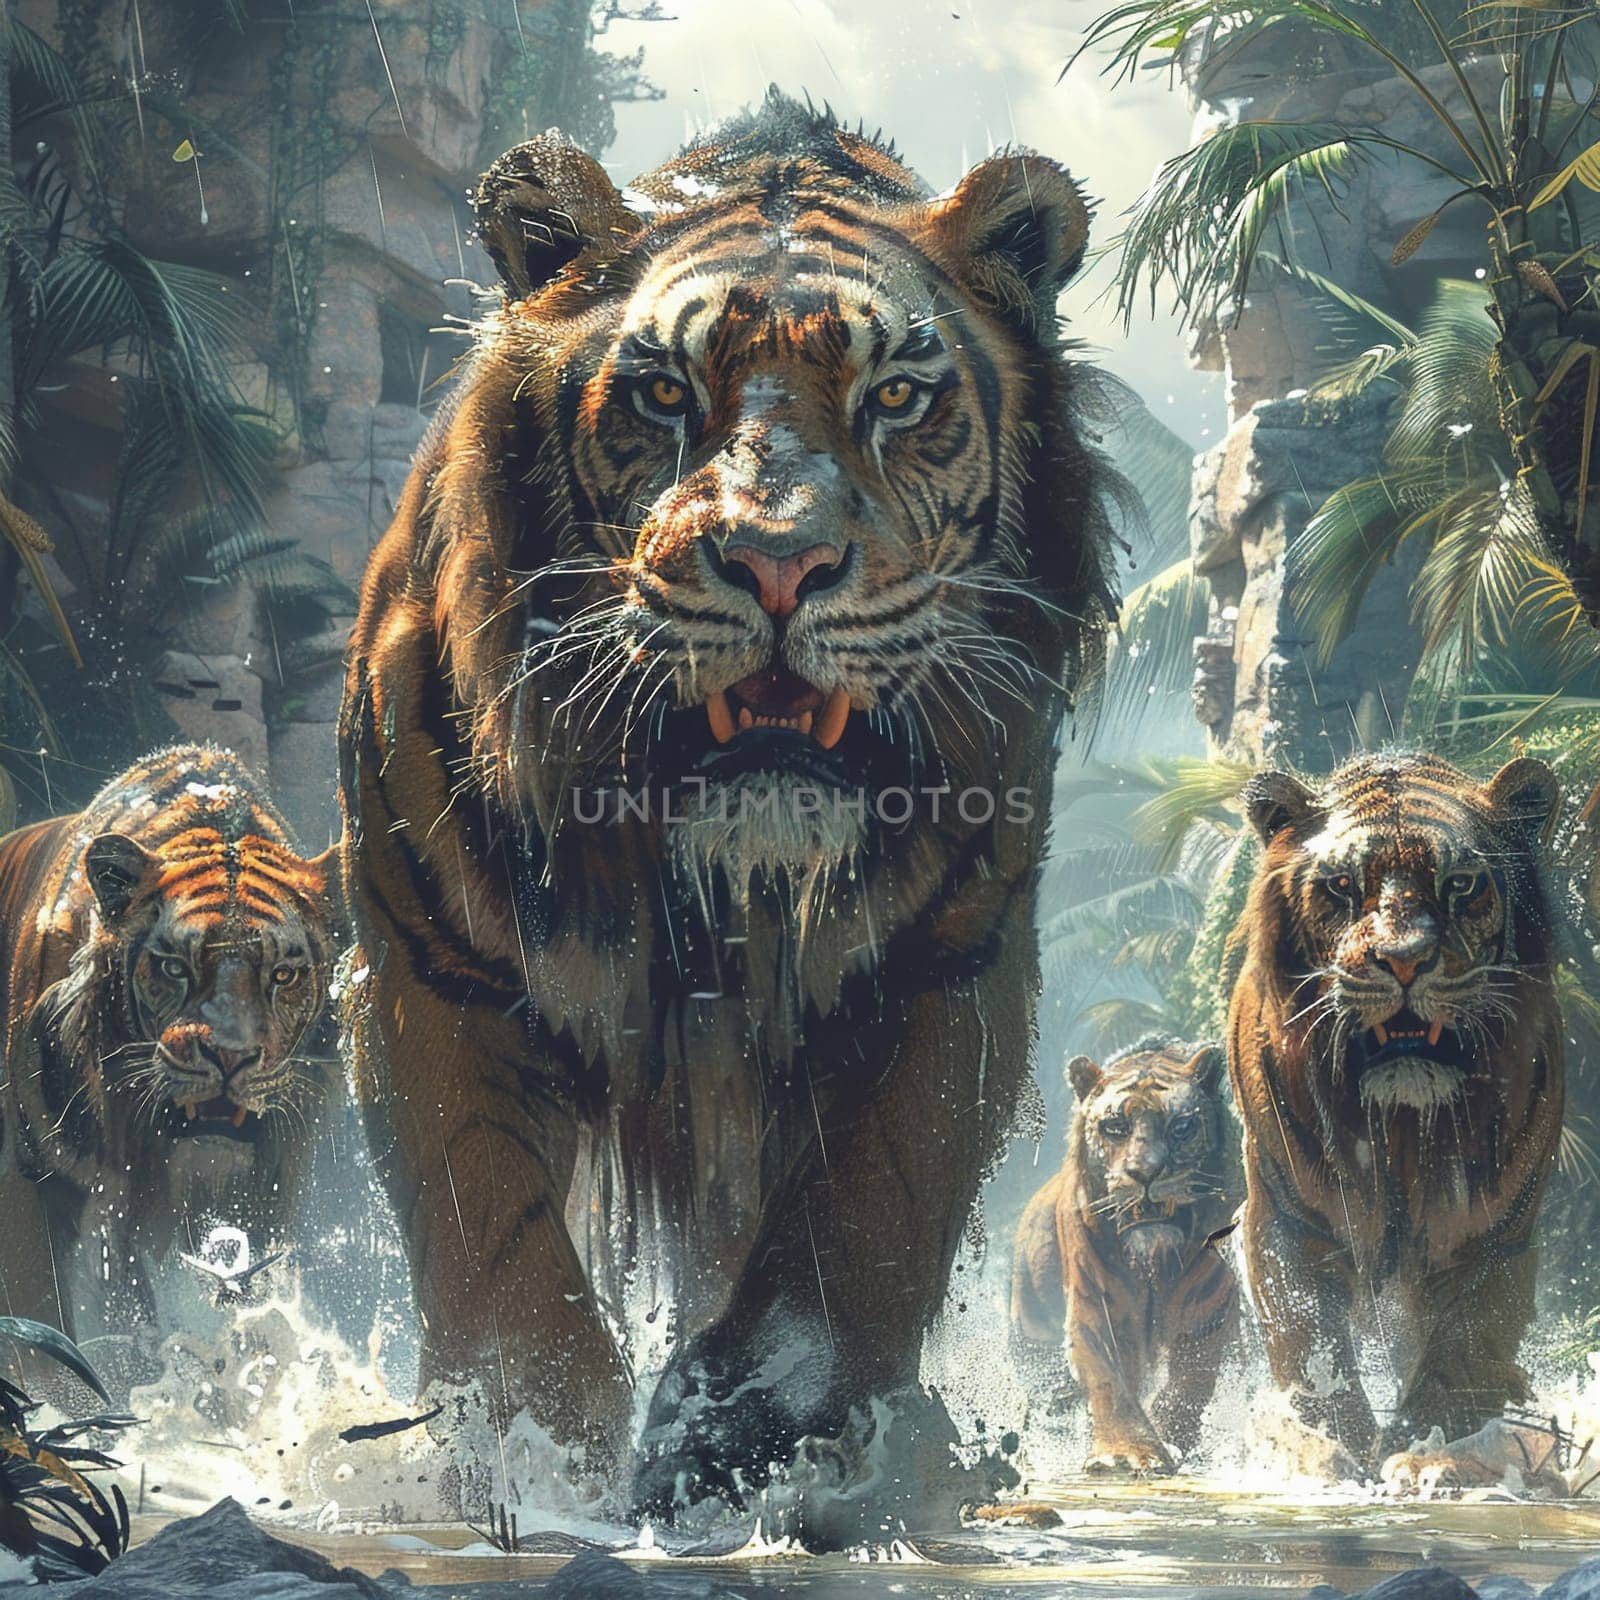 Concept art for video game where players protect endangered species on World Wildlife Day. by Benzoix